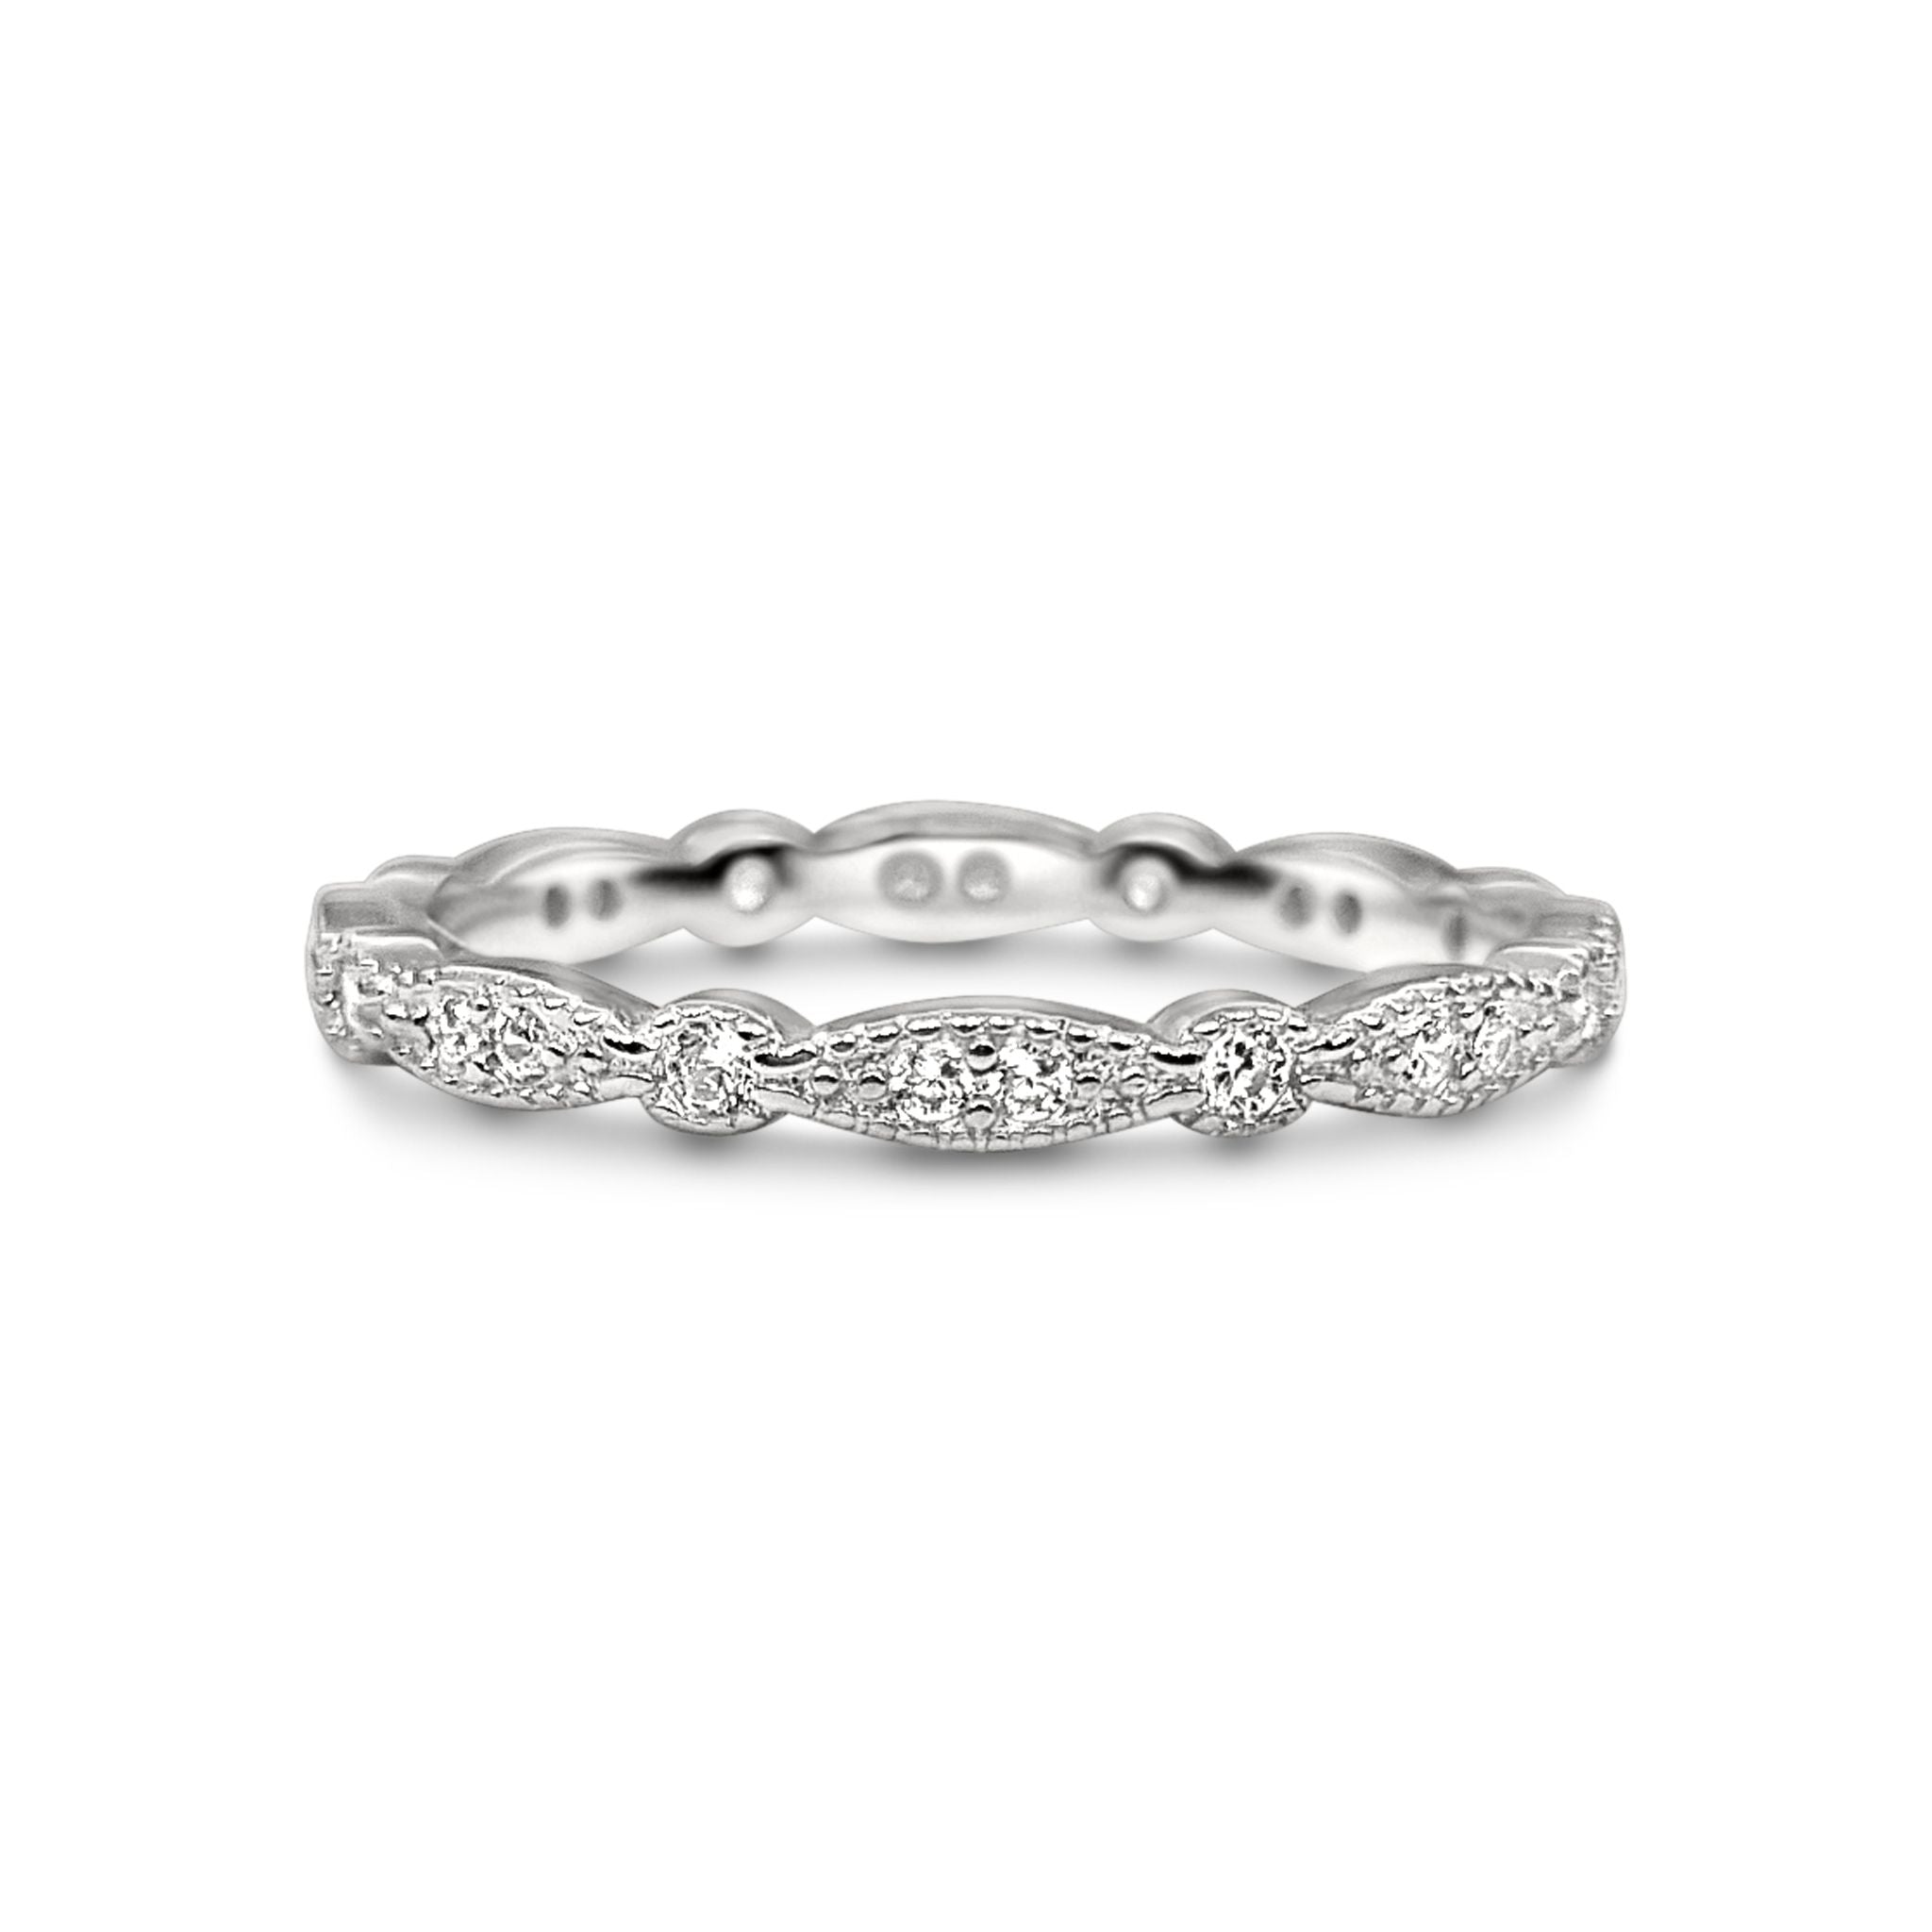 Vintage Style Full Eternity Band in Sterling Silver